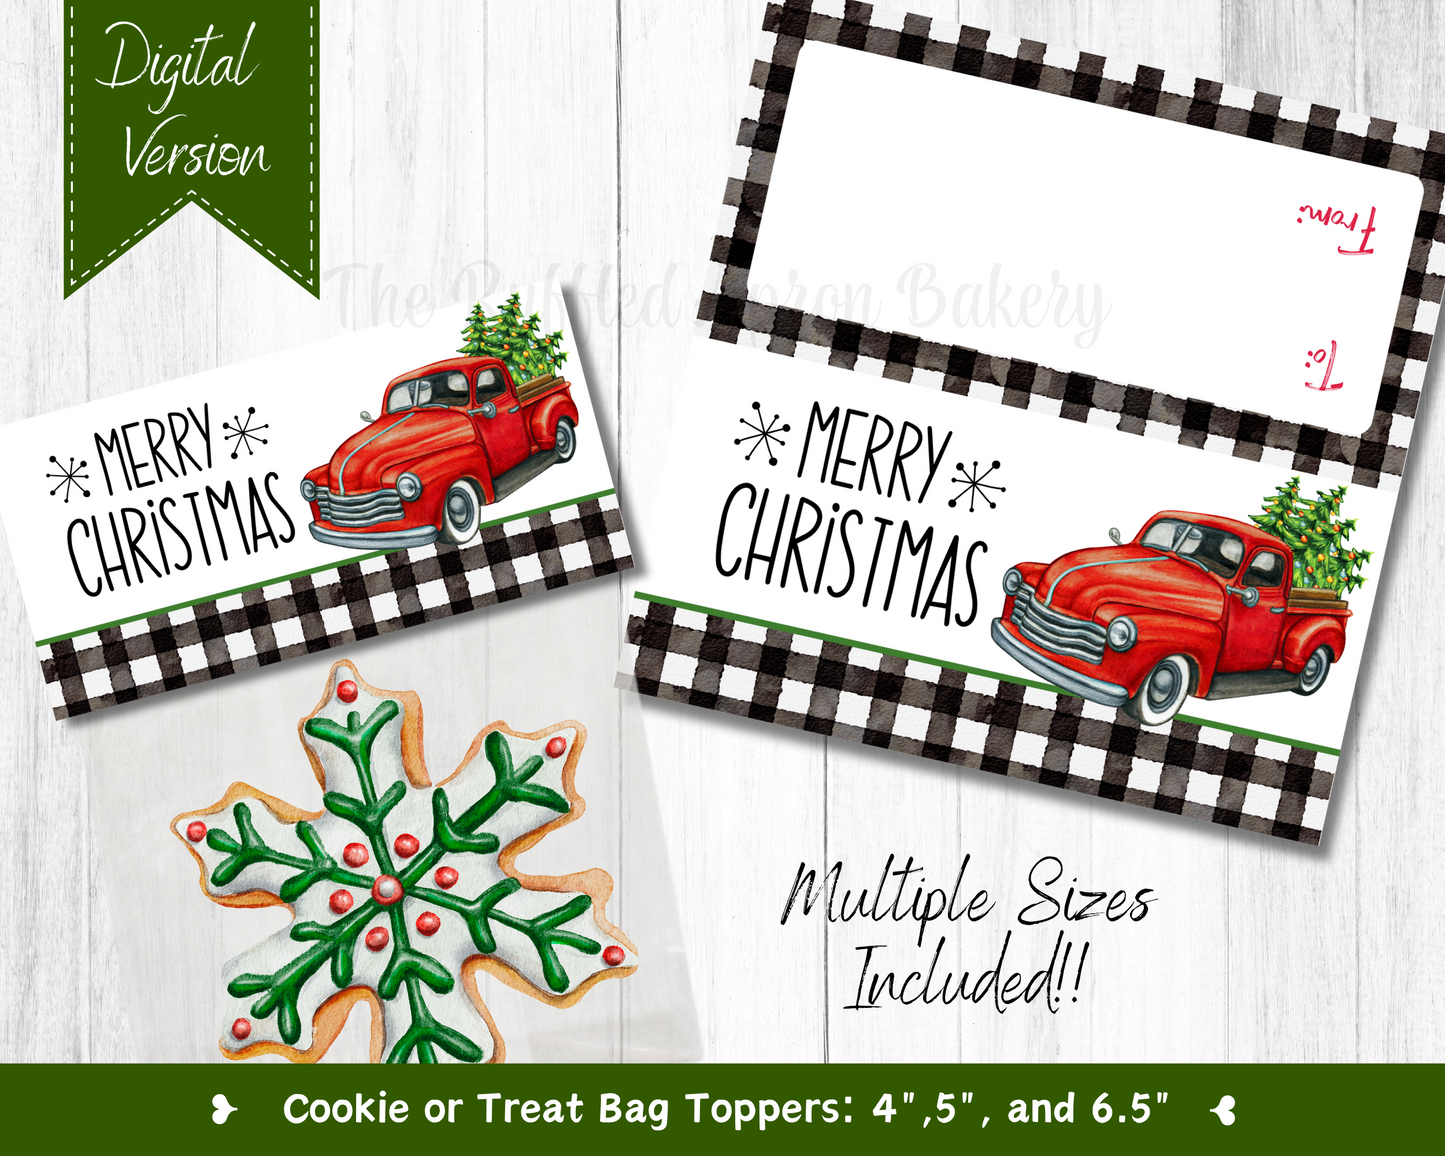 Merry Christmas Cookie Bag Toppers